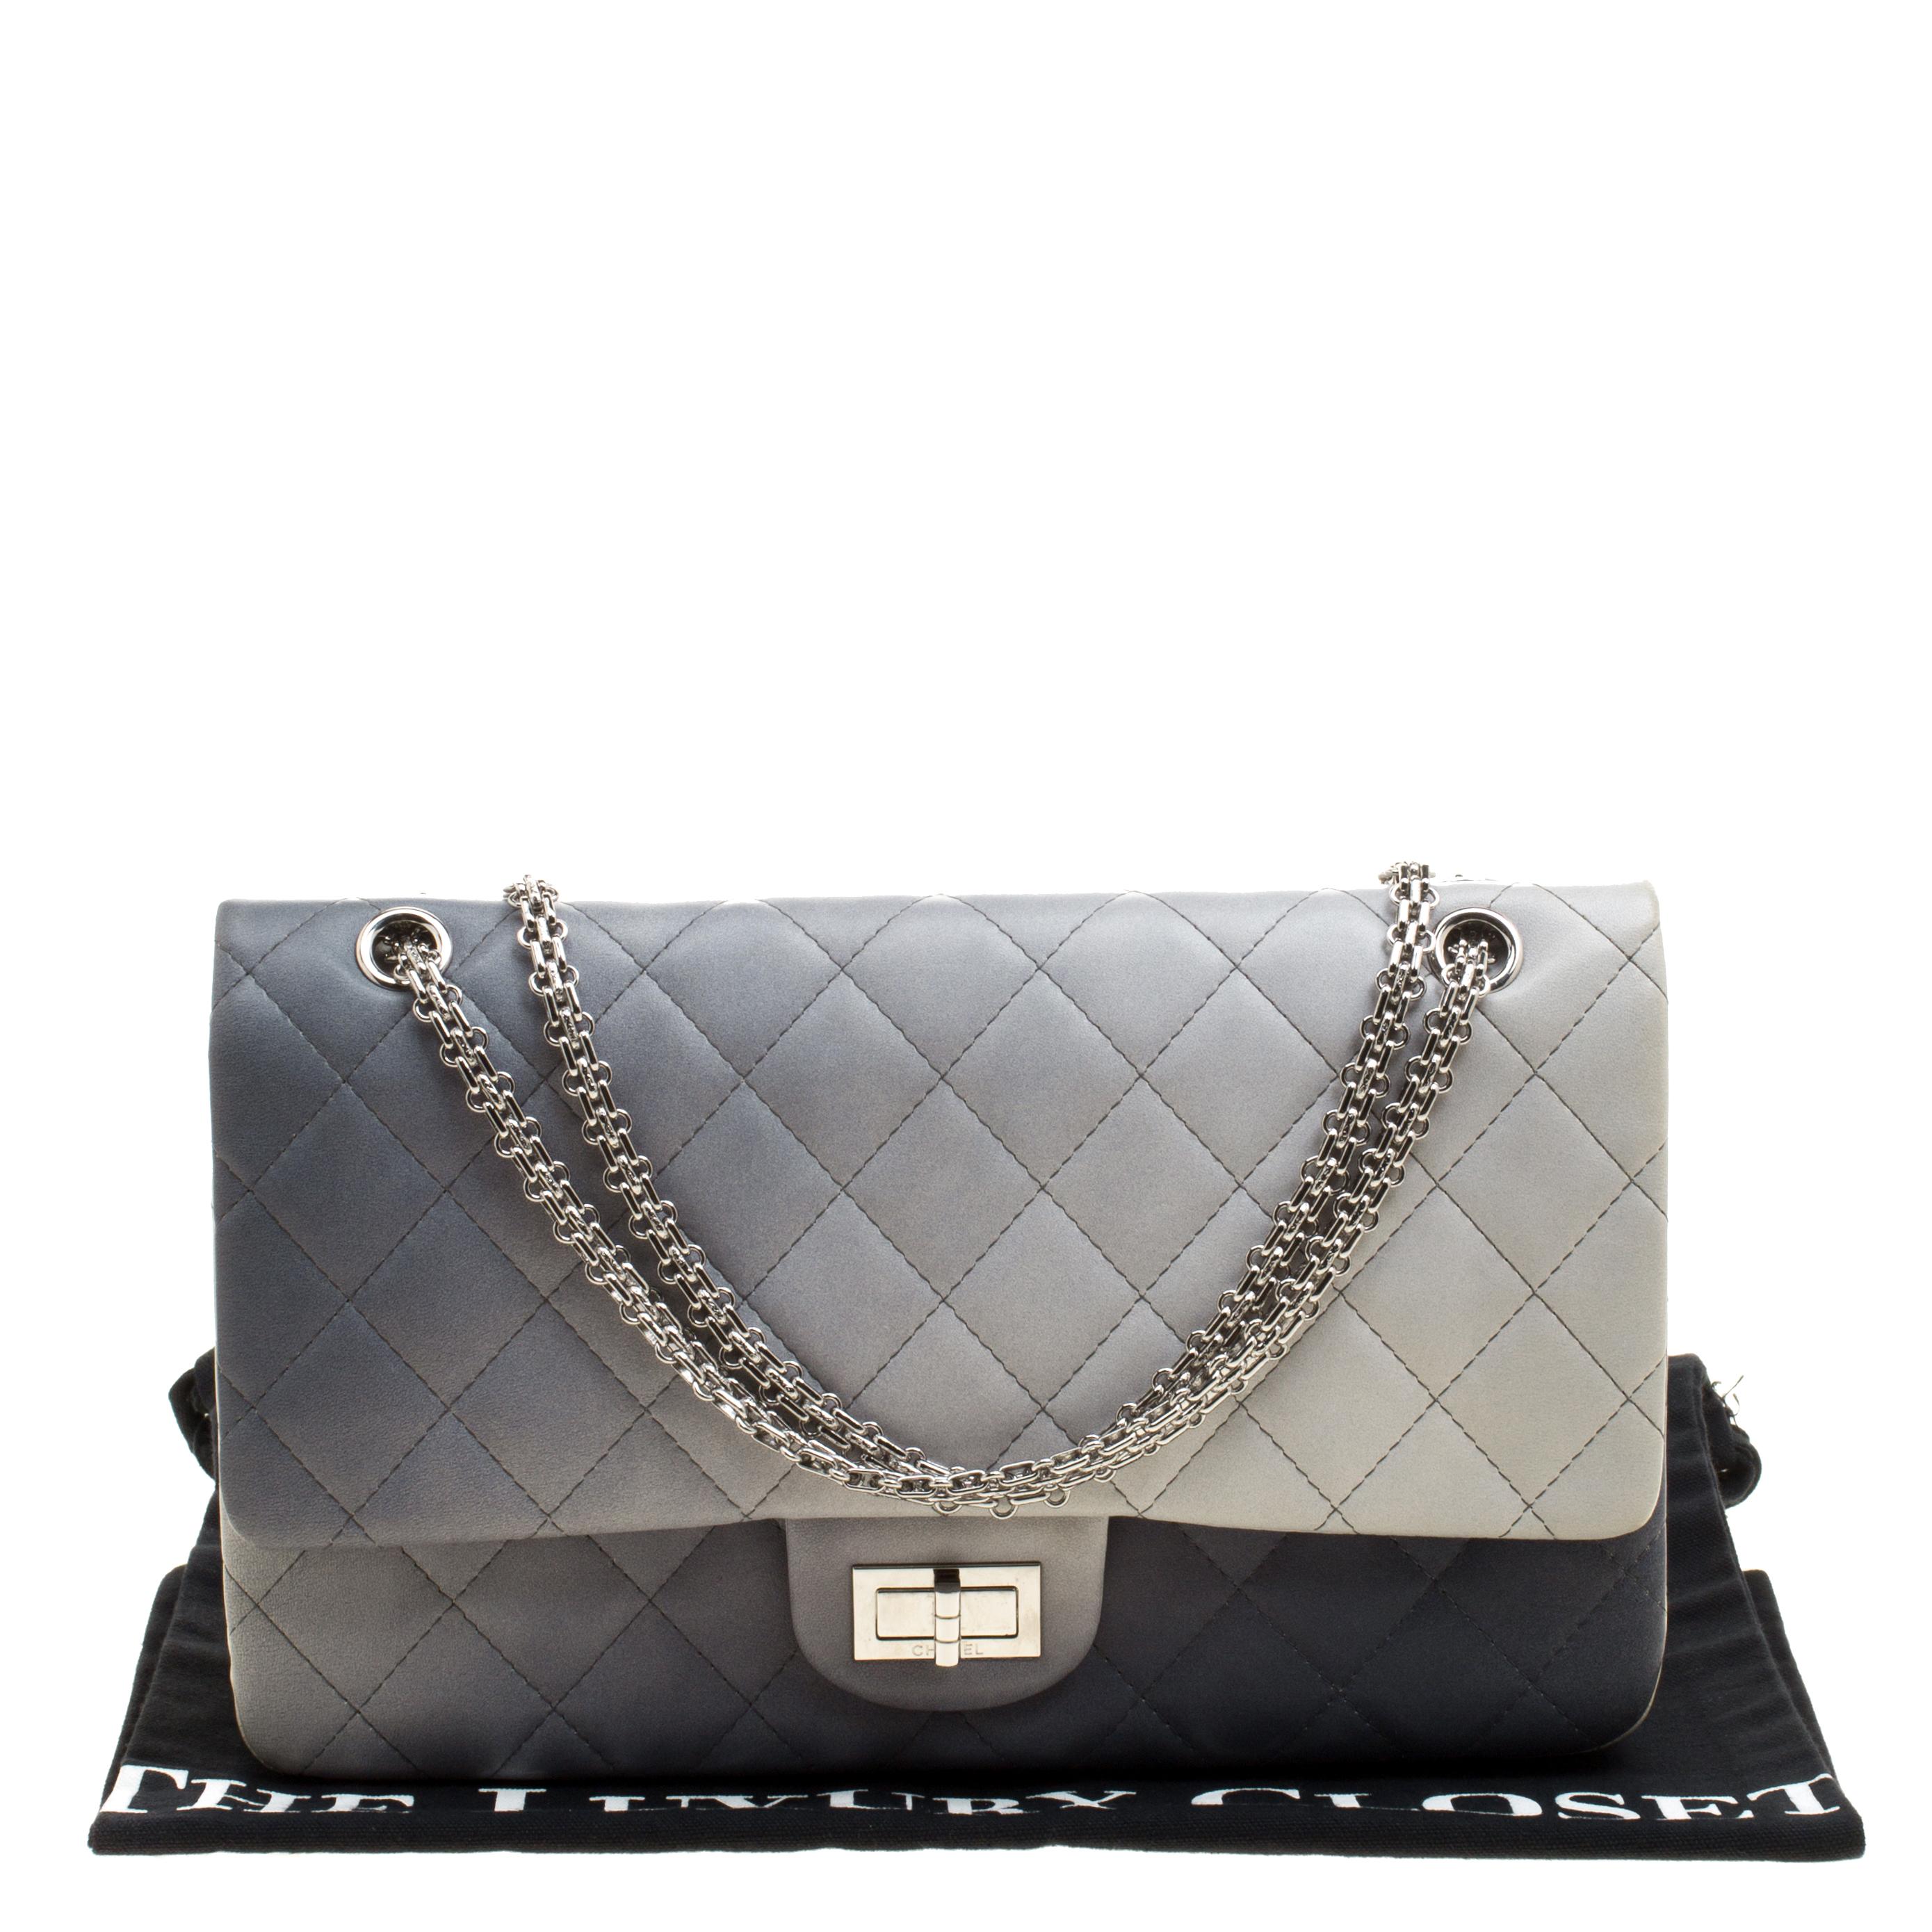 Chanel Multicolor Quilted Leather Reissue 2.55 Classic 227 Flap Bag 2